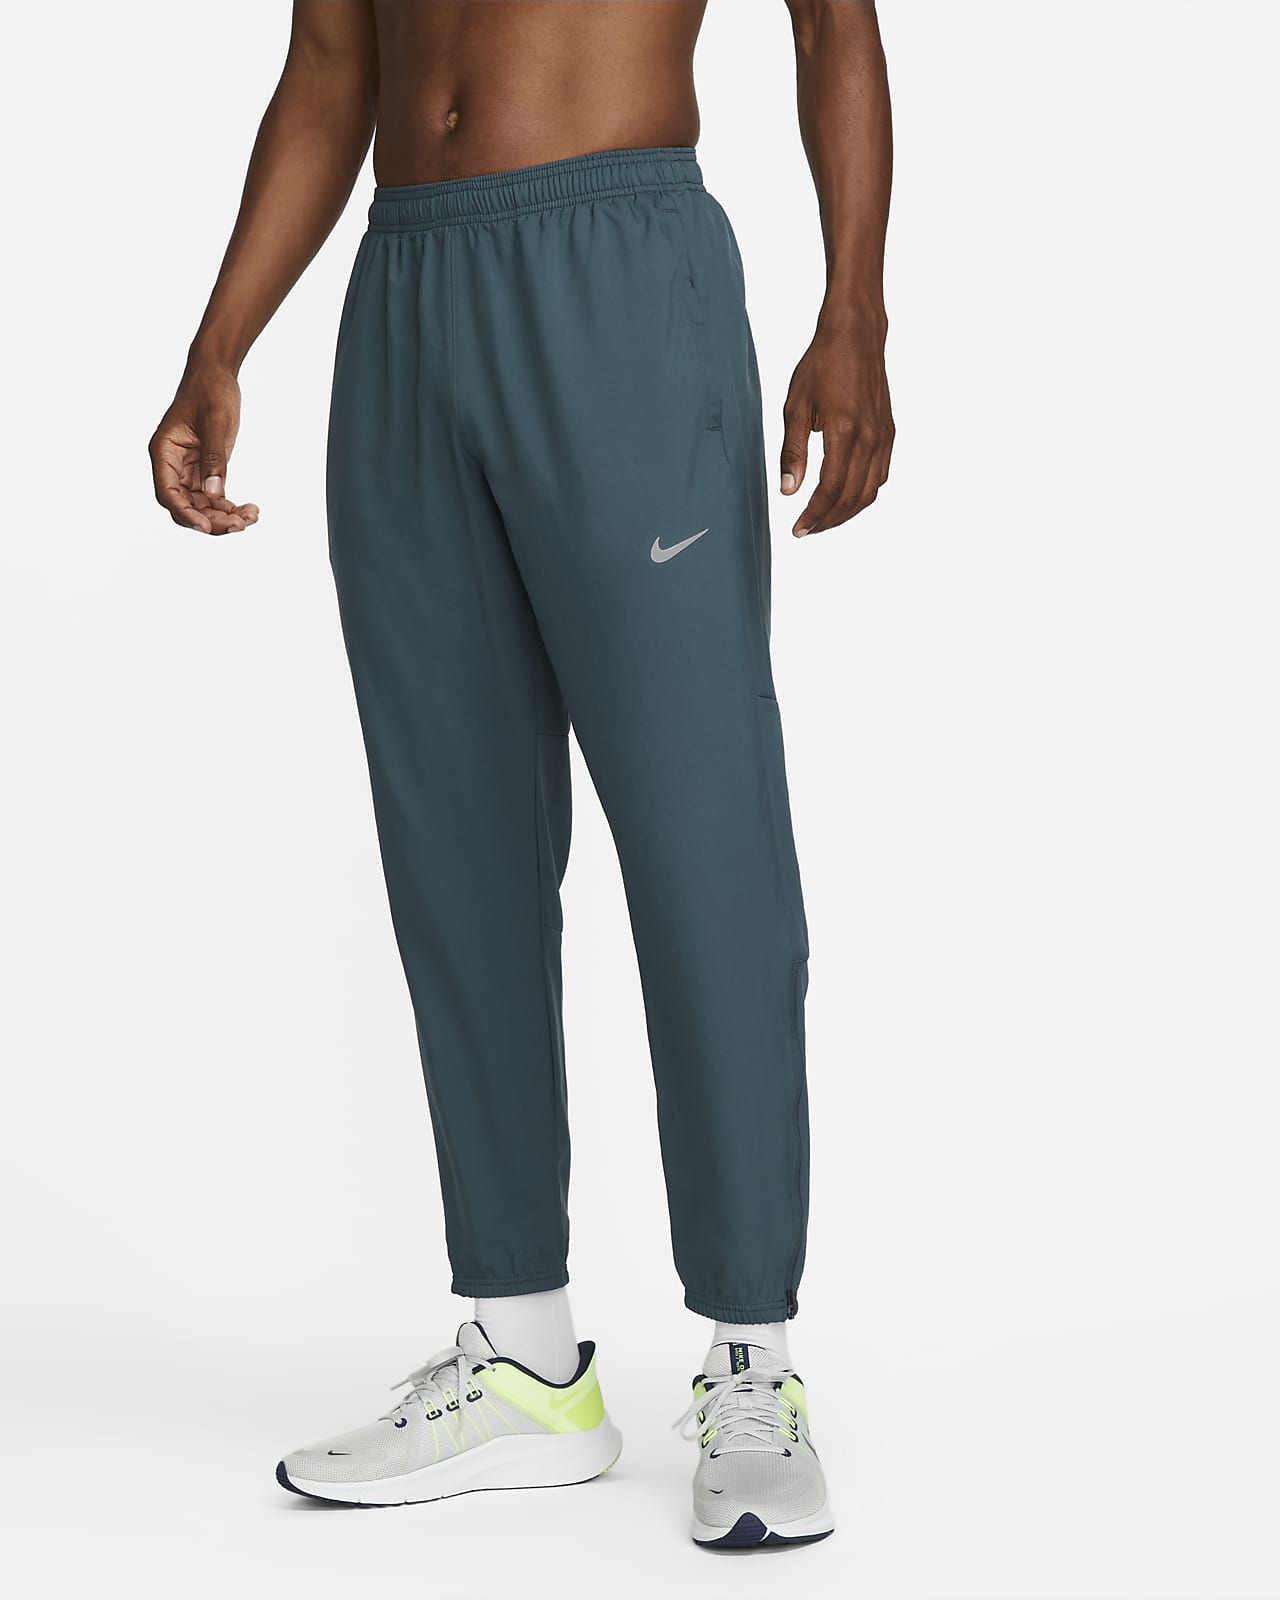 Festival have confidence each other Nike Dri-FIT Challenger Men's Woven Running Pants. Nike.com